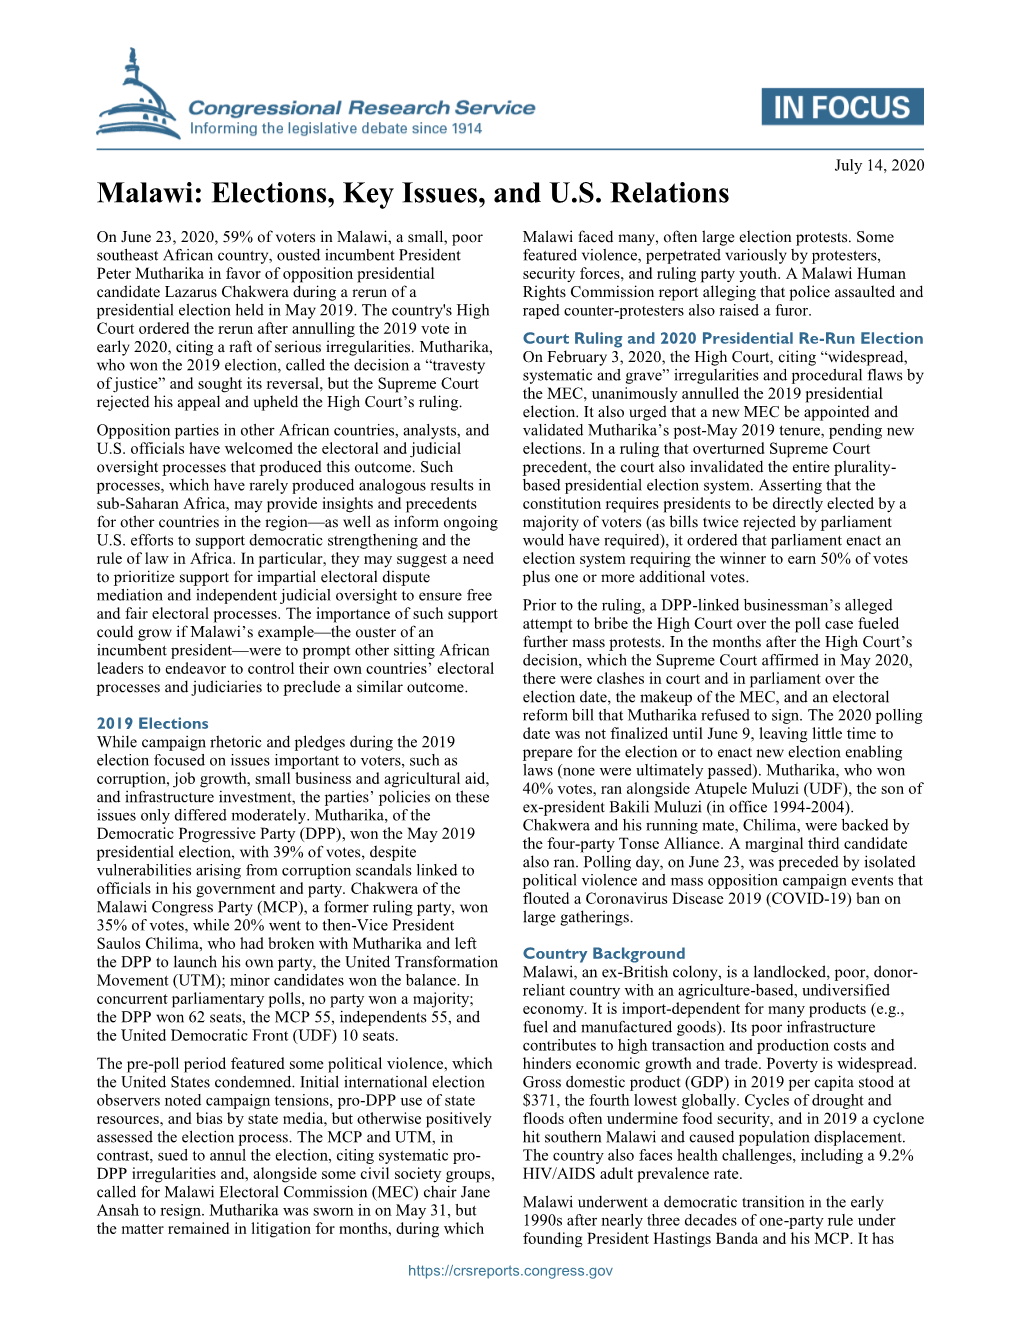 Malawi: Elections, Key Issues, and U.S